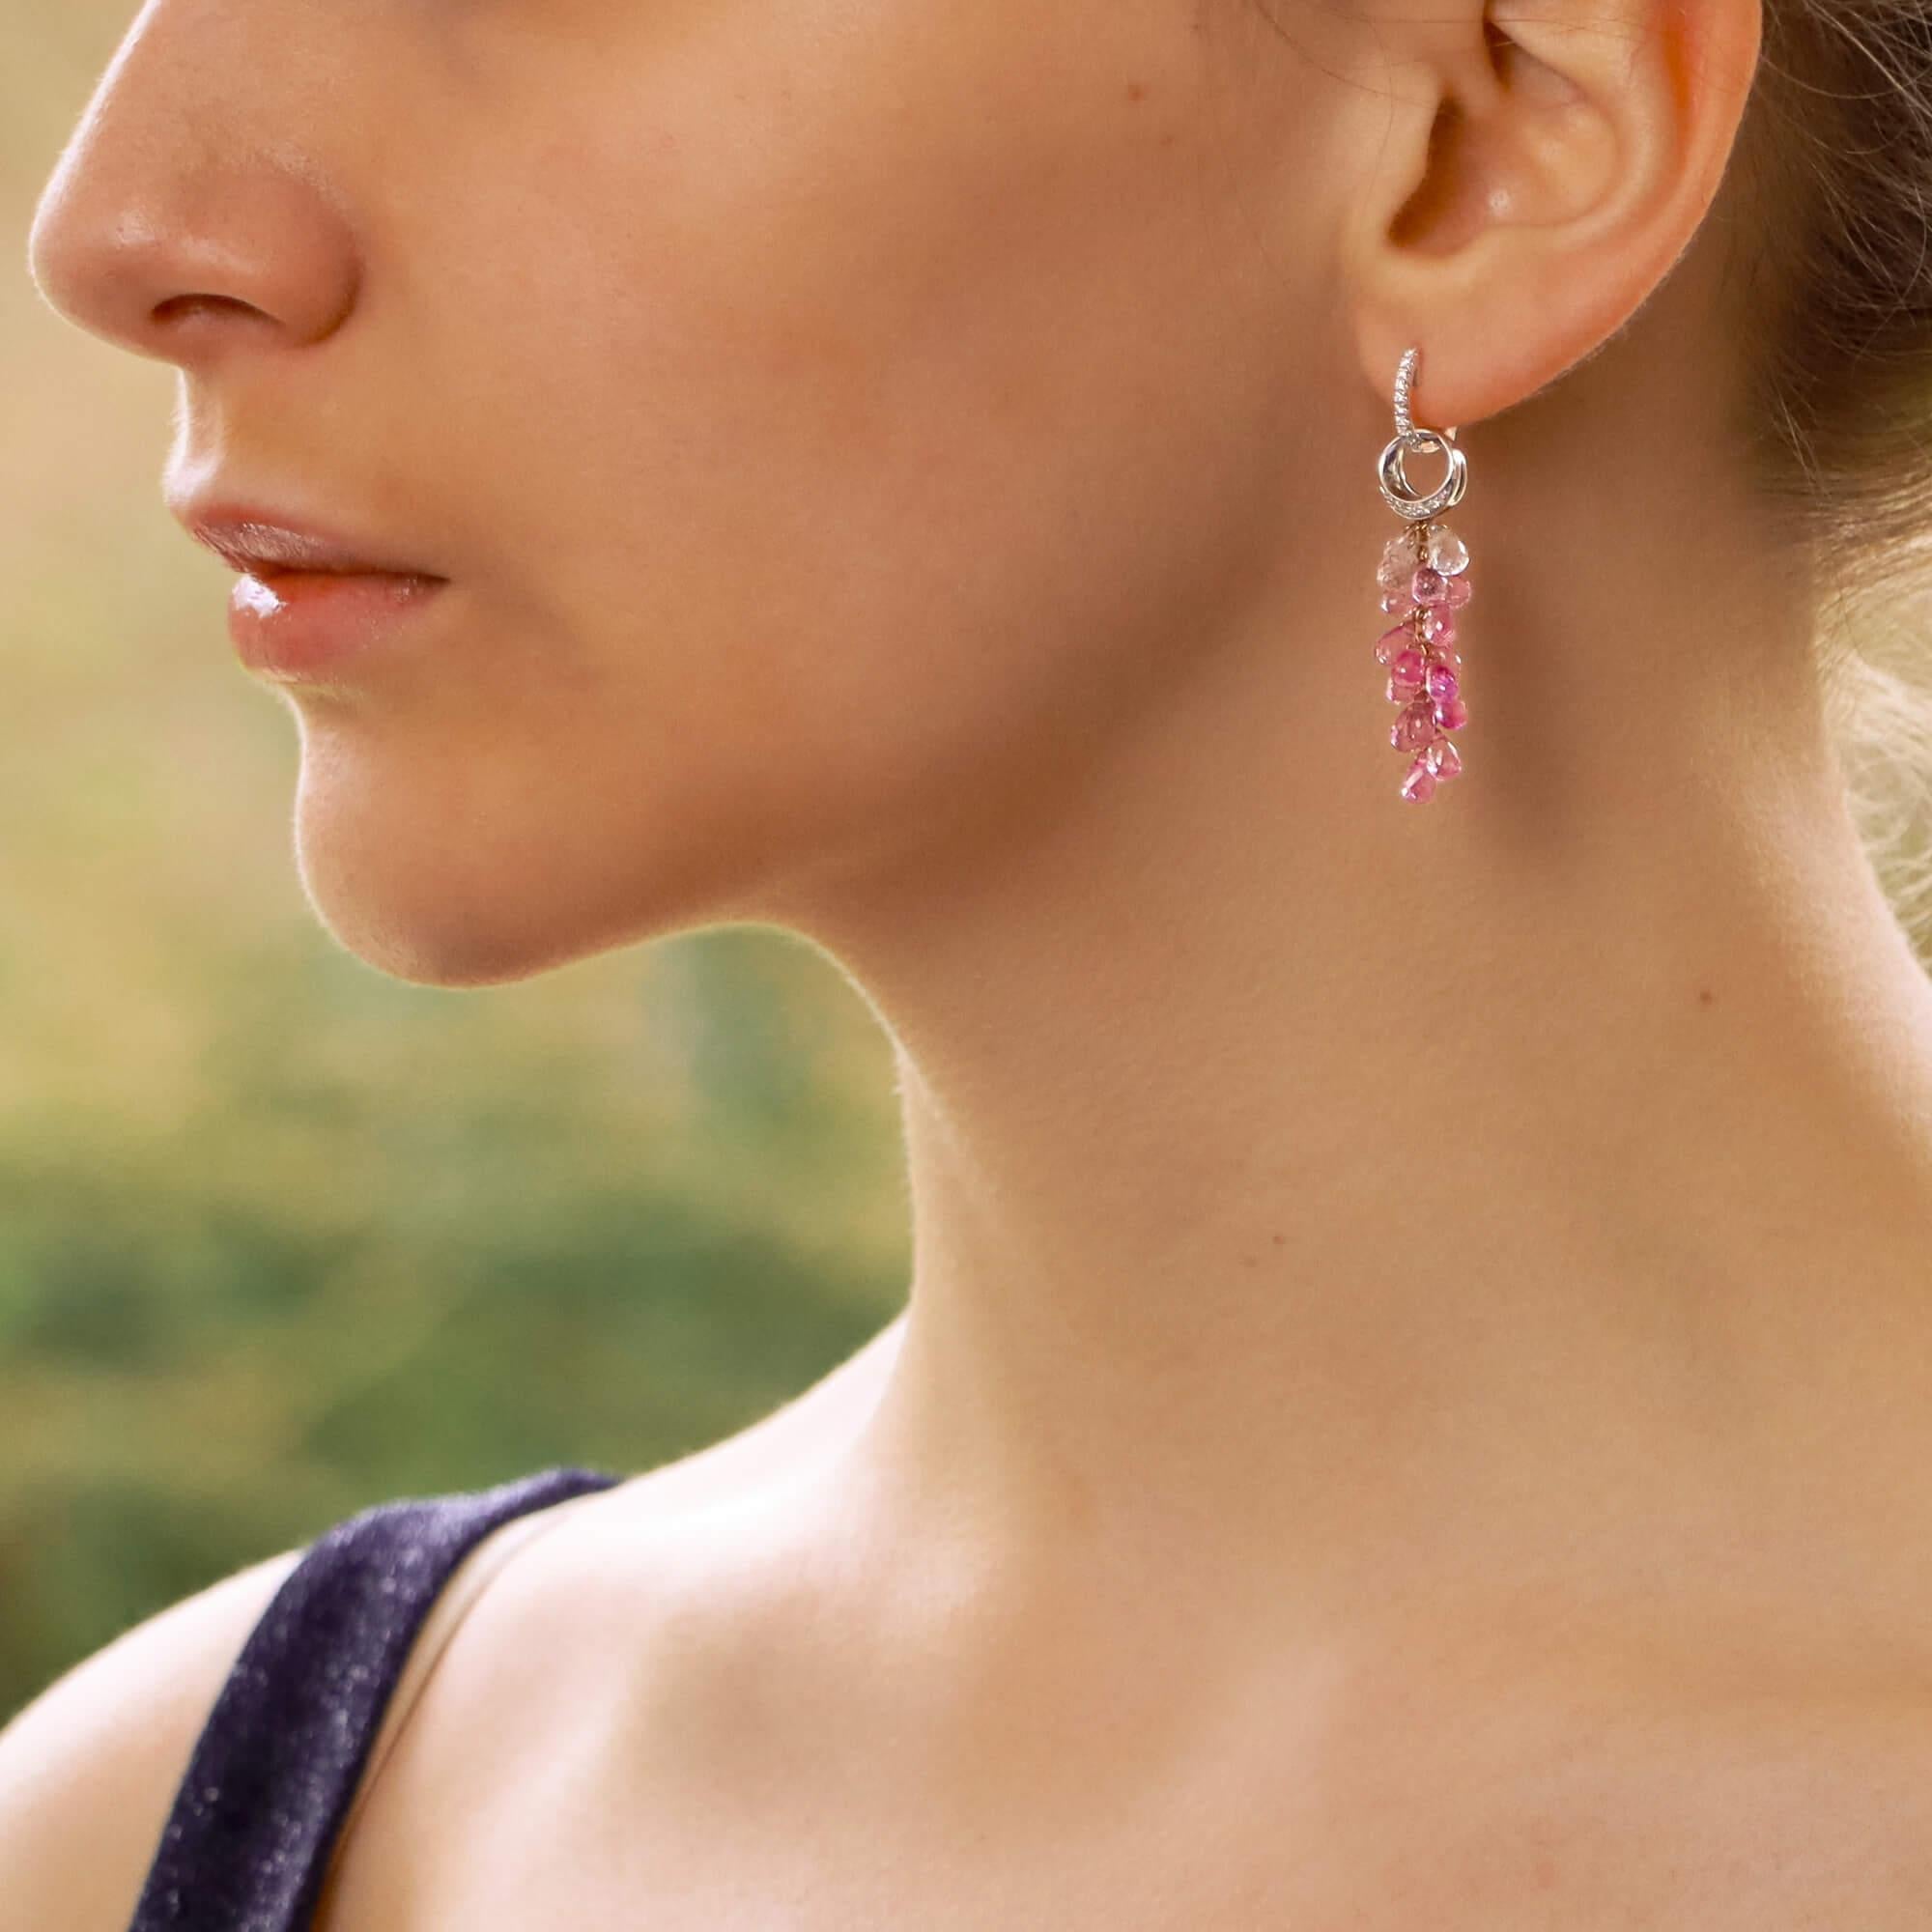 A lovely pair of diamond and briolette sapphire convertible drop earrings set in 18k white and rose gold.

Each earring has been beautifully crafted and firstly features a petite pavé set diamond hoop. From this hoop suspends an openwork circular